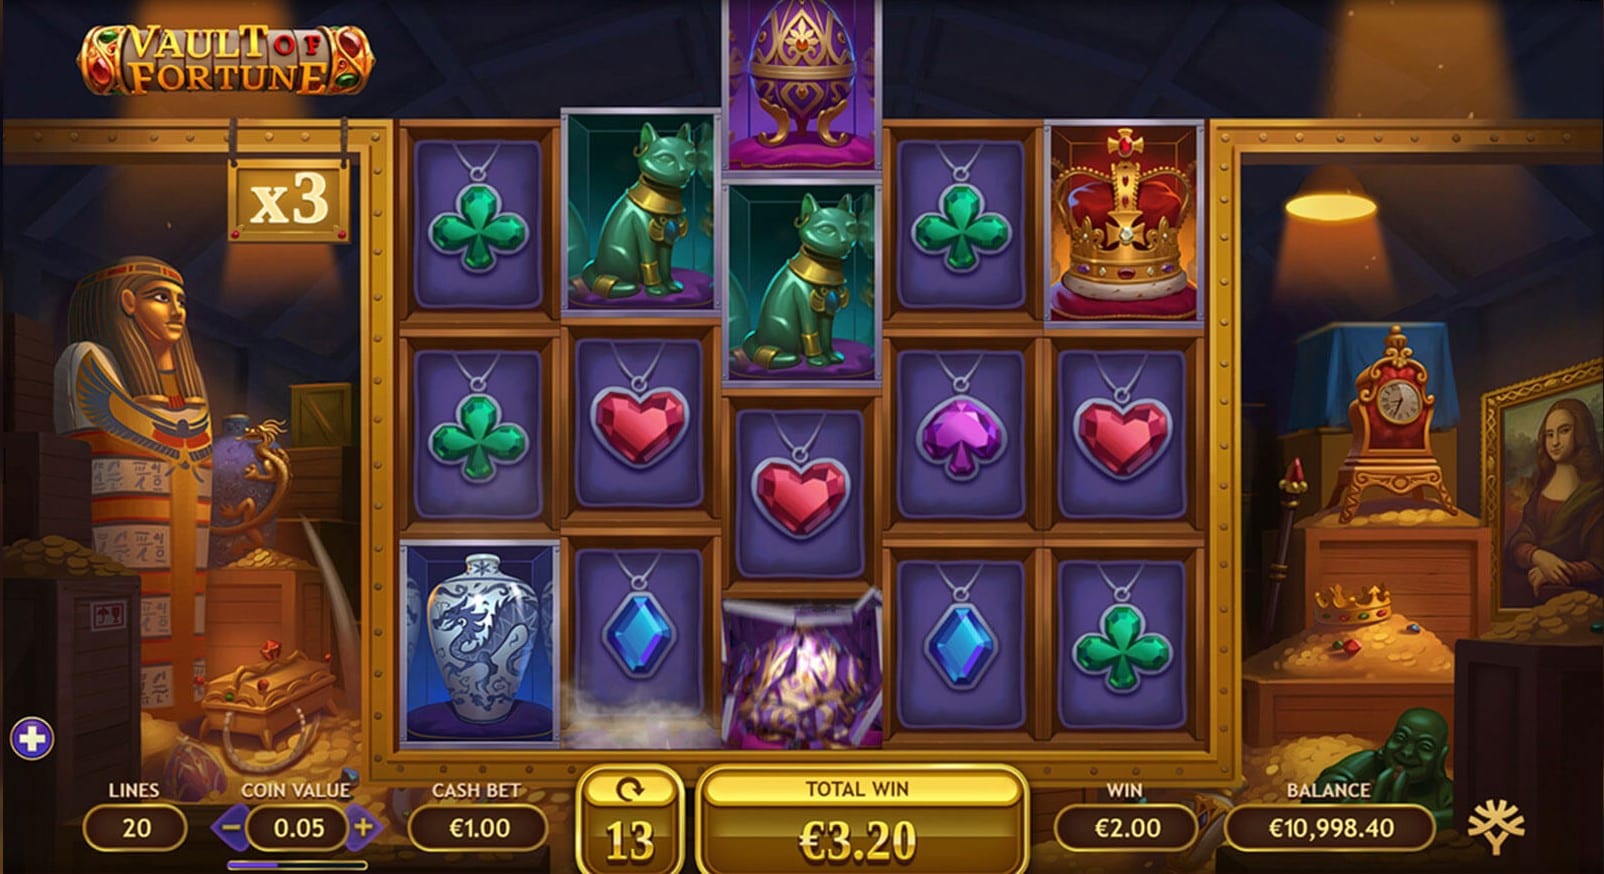 Vault of Fortune Slot Game